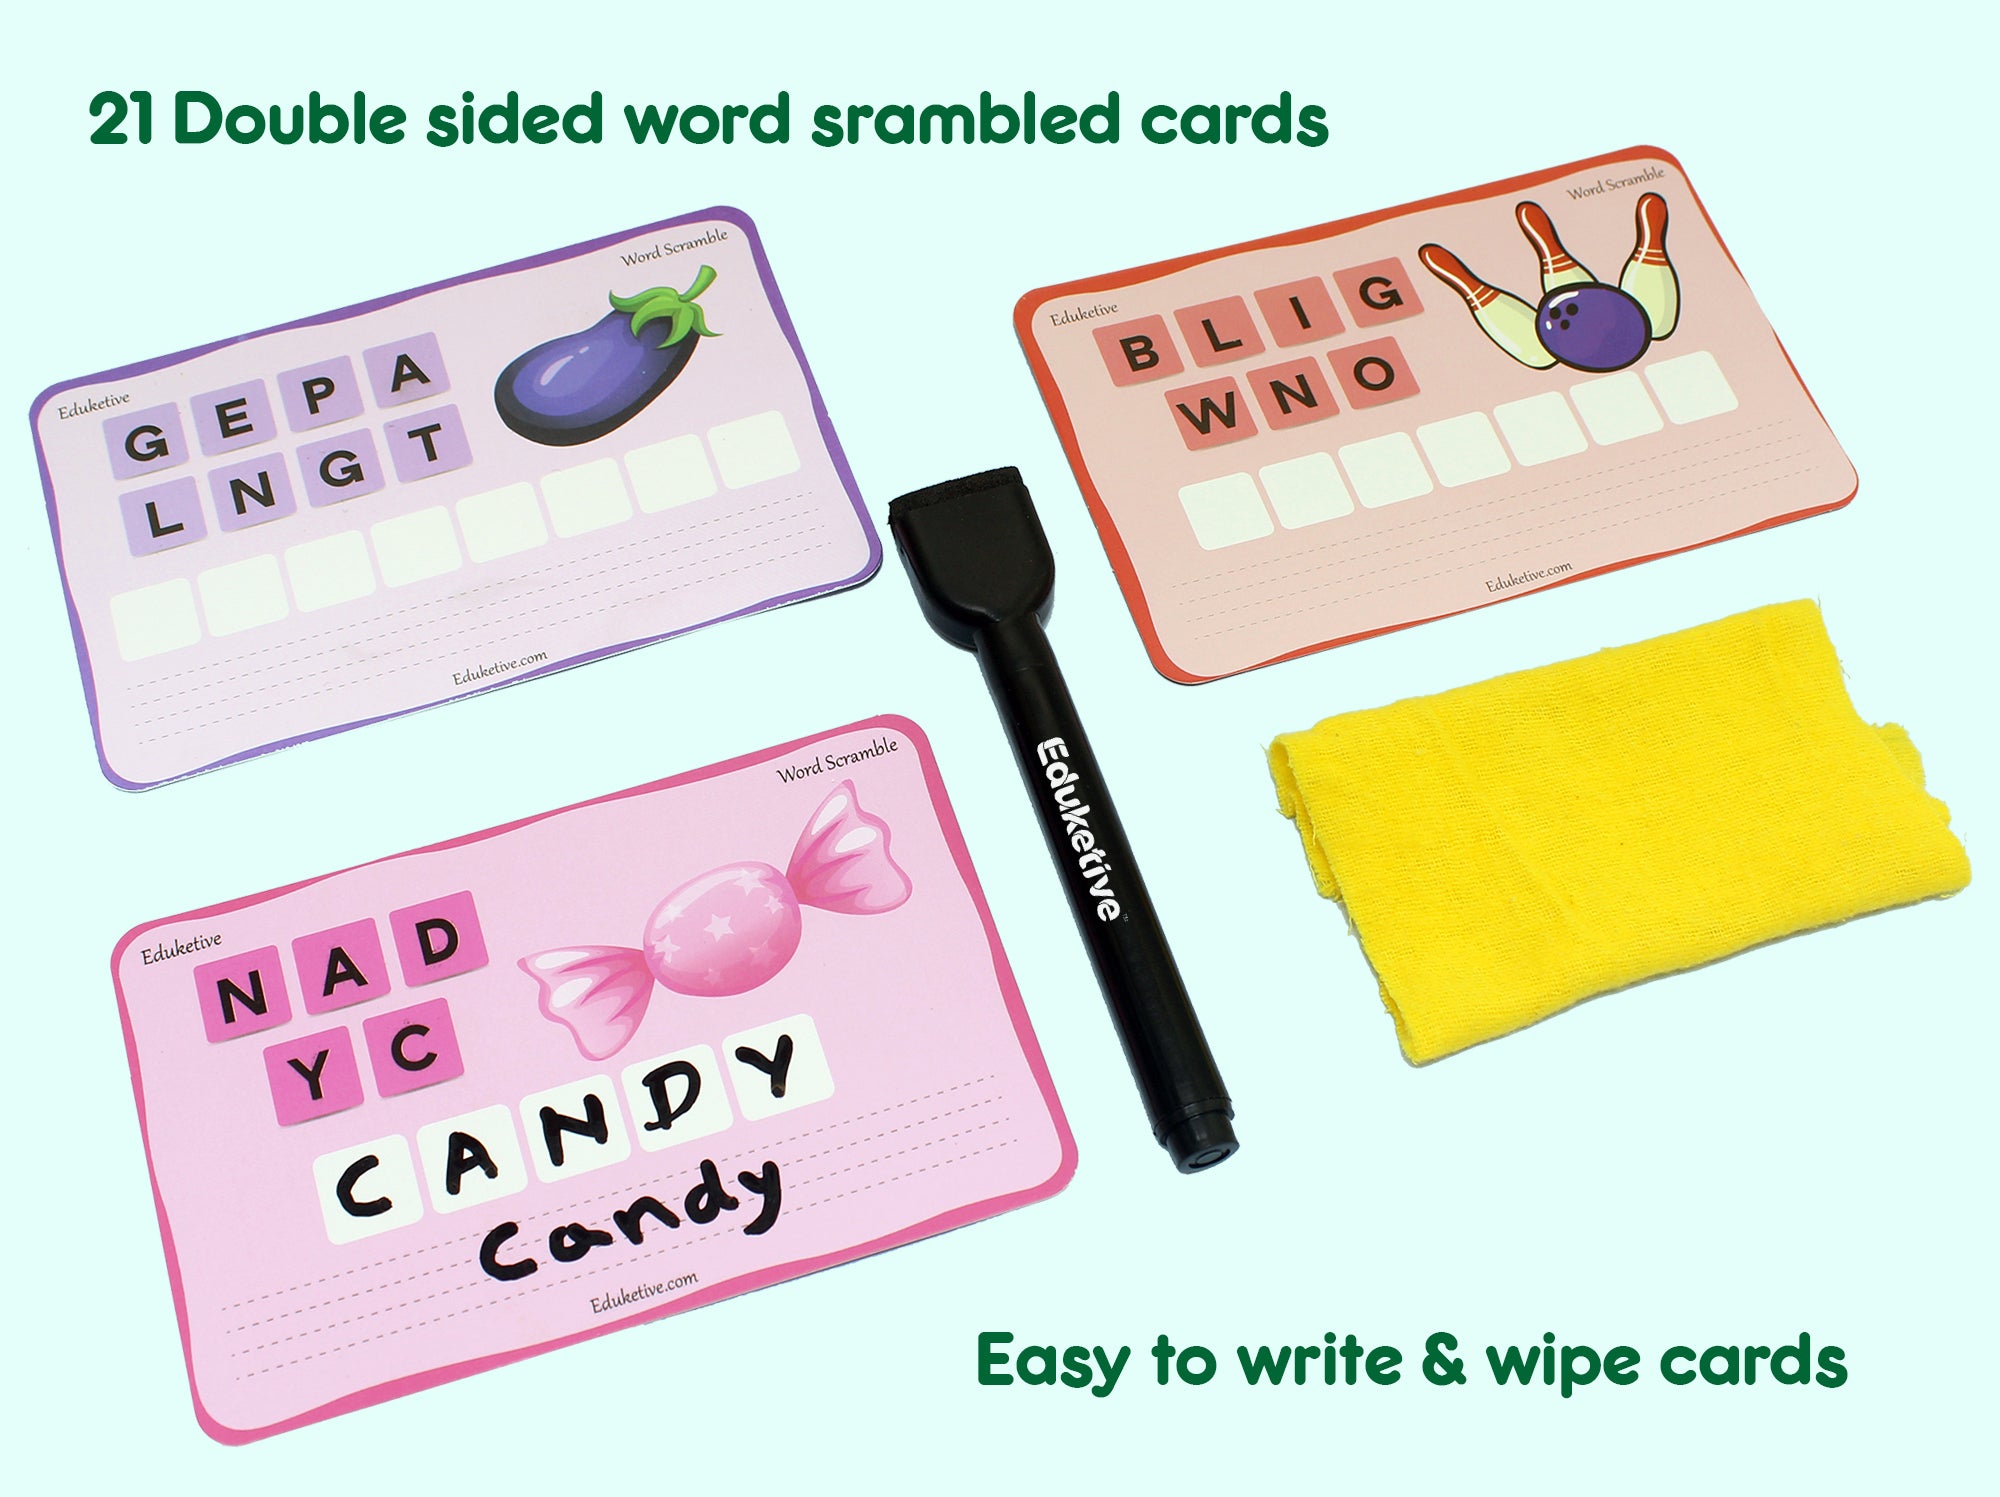 PenControl + ABC Letters + Word Scramble - Combo of 3 - Write & Wipe Activity  | Book Bargain Buy